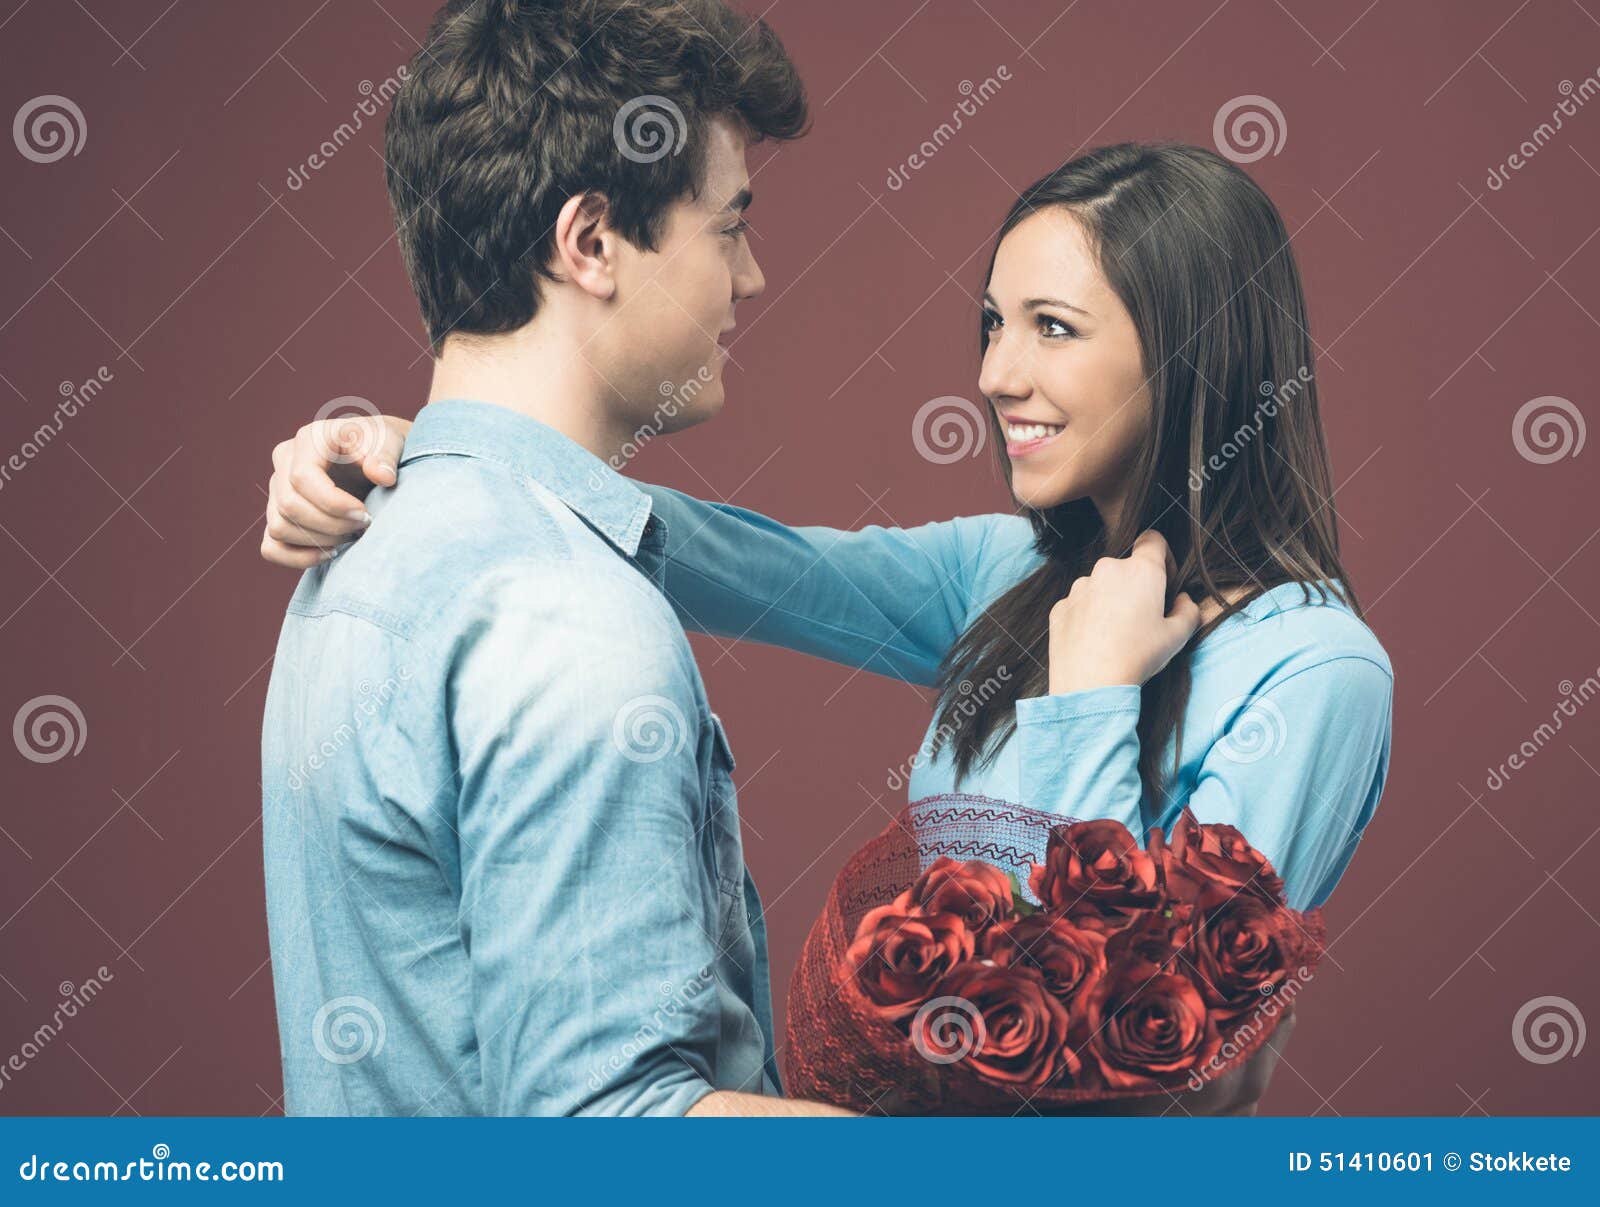 https://thumbs.dreamstime.com/z/smiling-woman-receiving-love-gift-young-women-red-roses-as-her-boyfriend-51410601.jpg